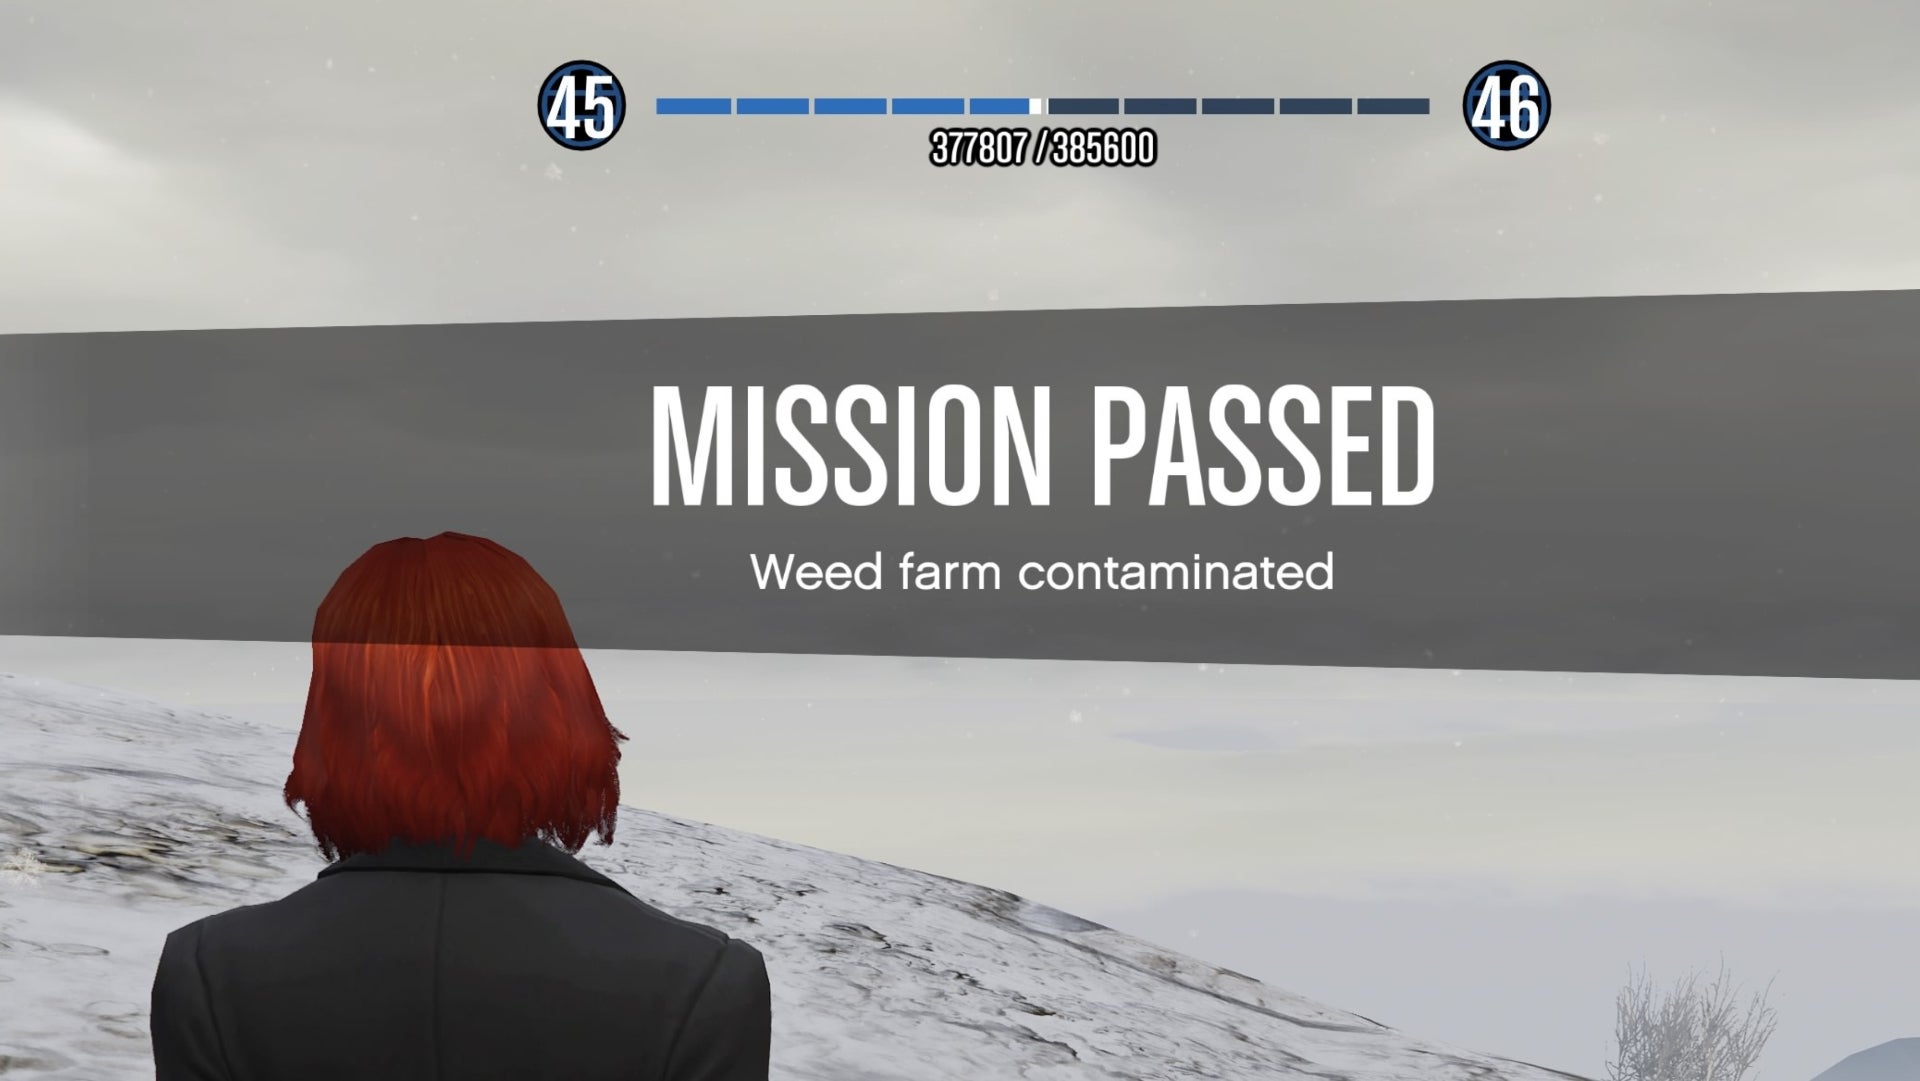 GTA Online, a mission passed screen showing the rank tracker at the top